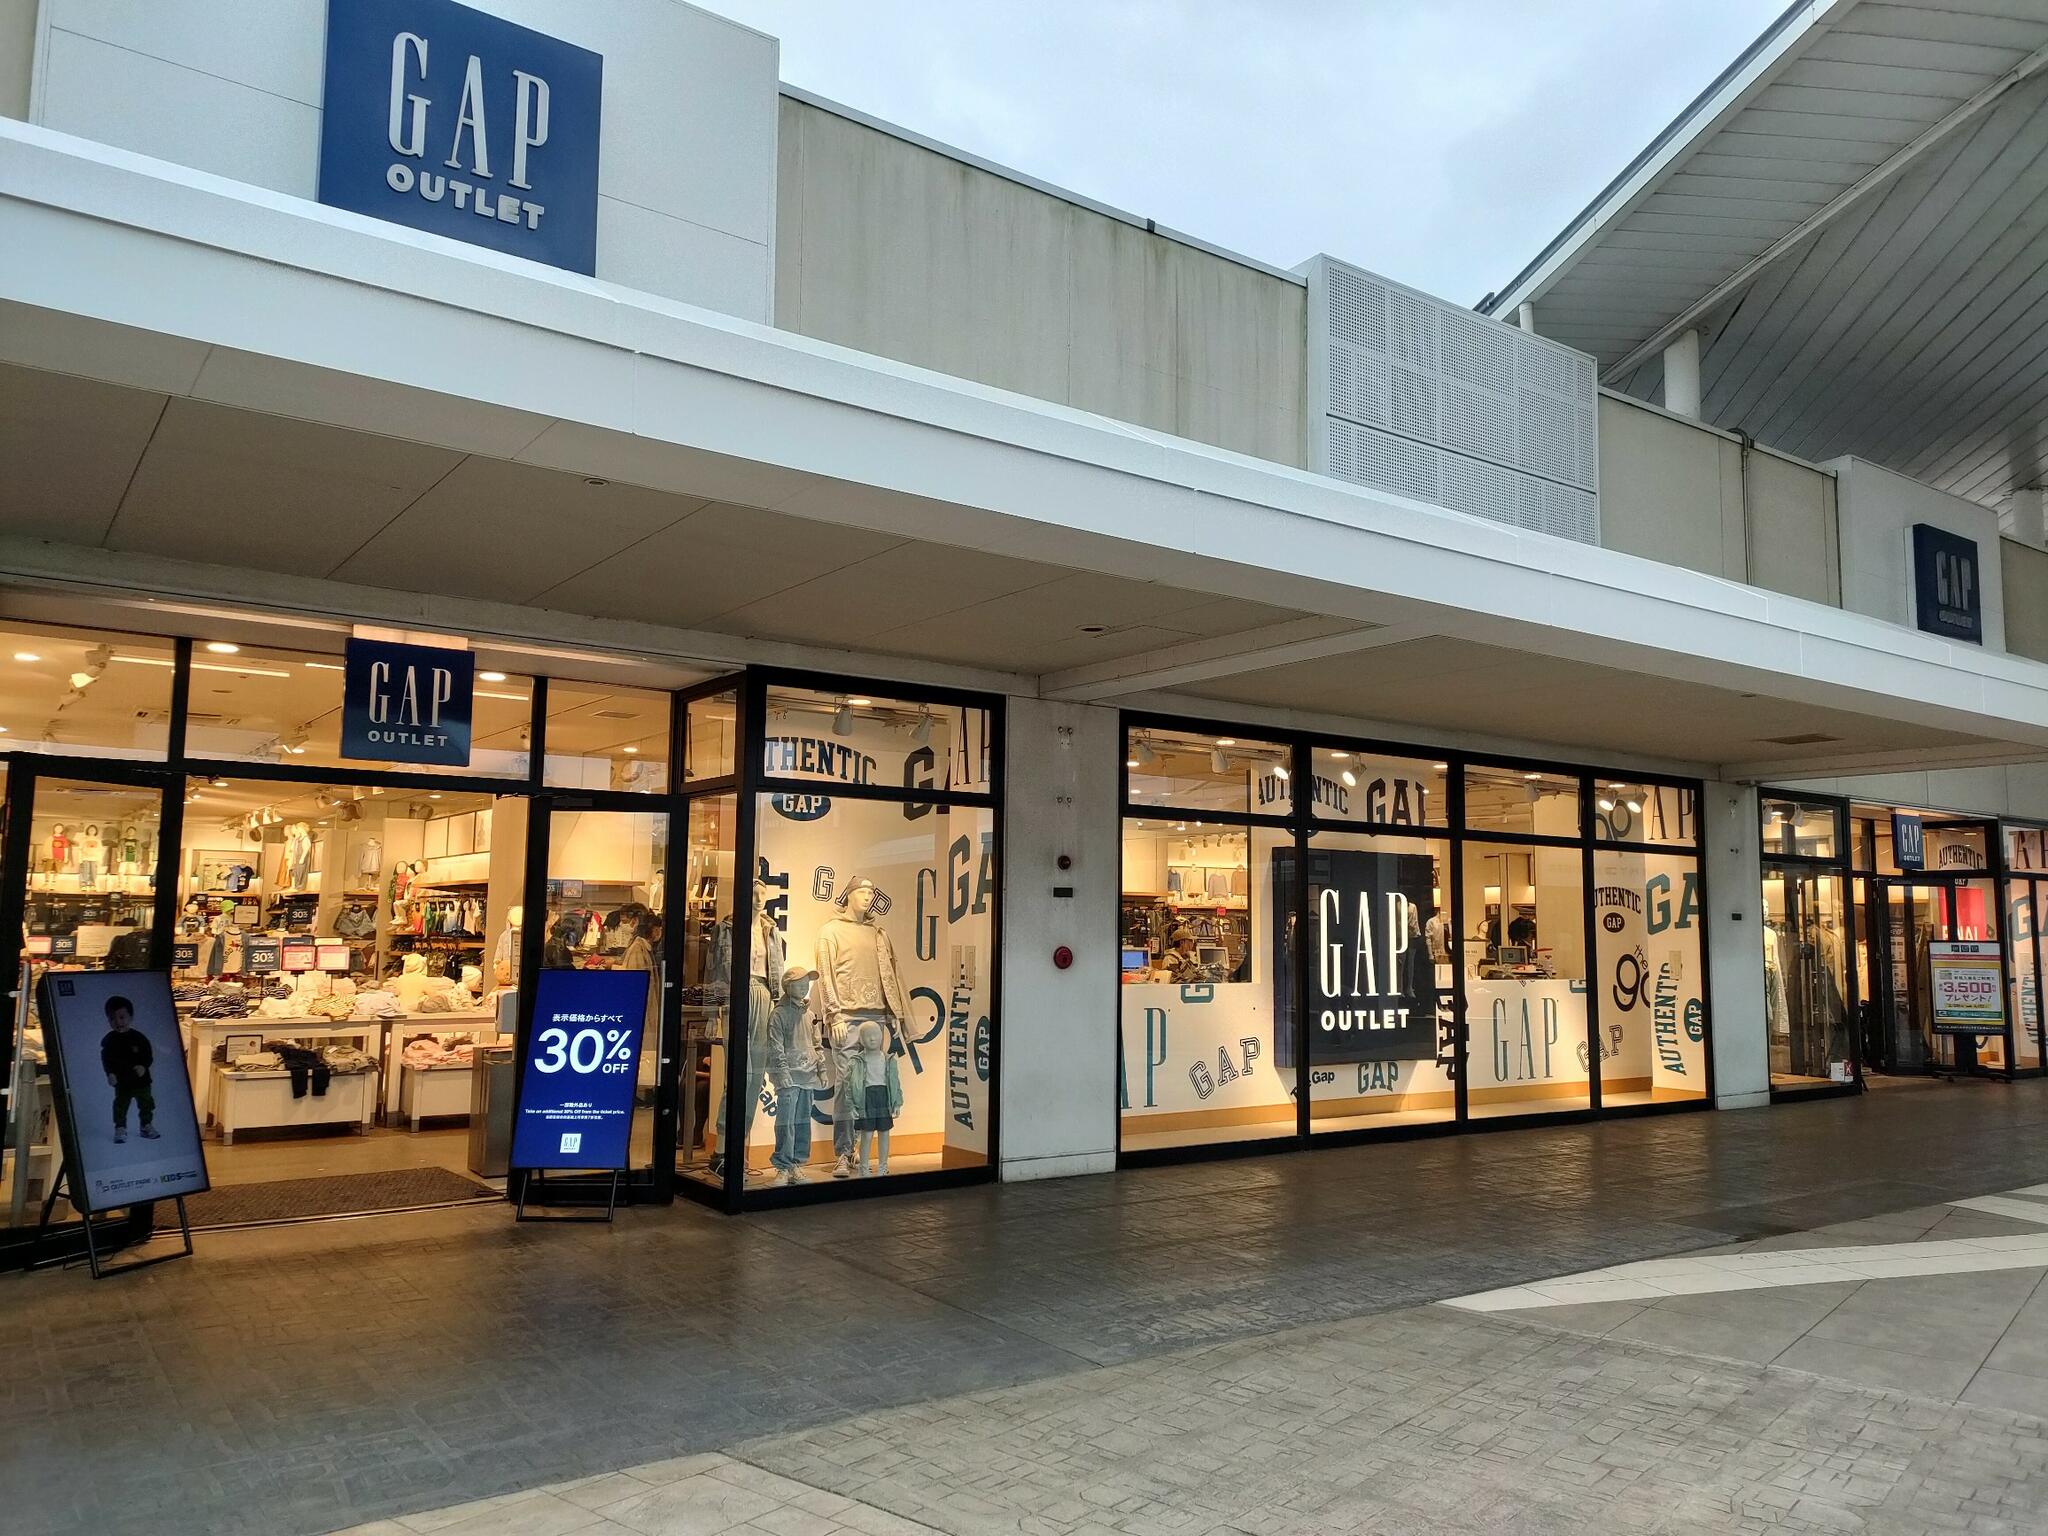 GAP Outlet 三井アウトレットパーク木更津店の代表写真4